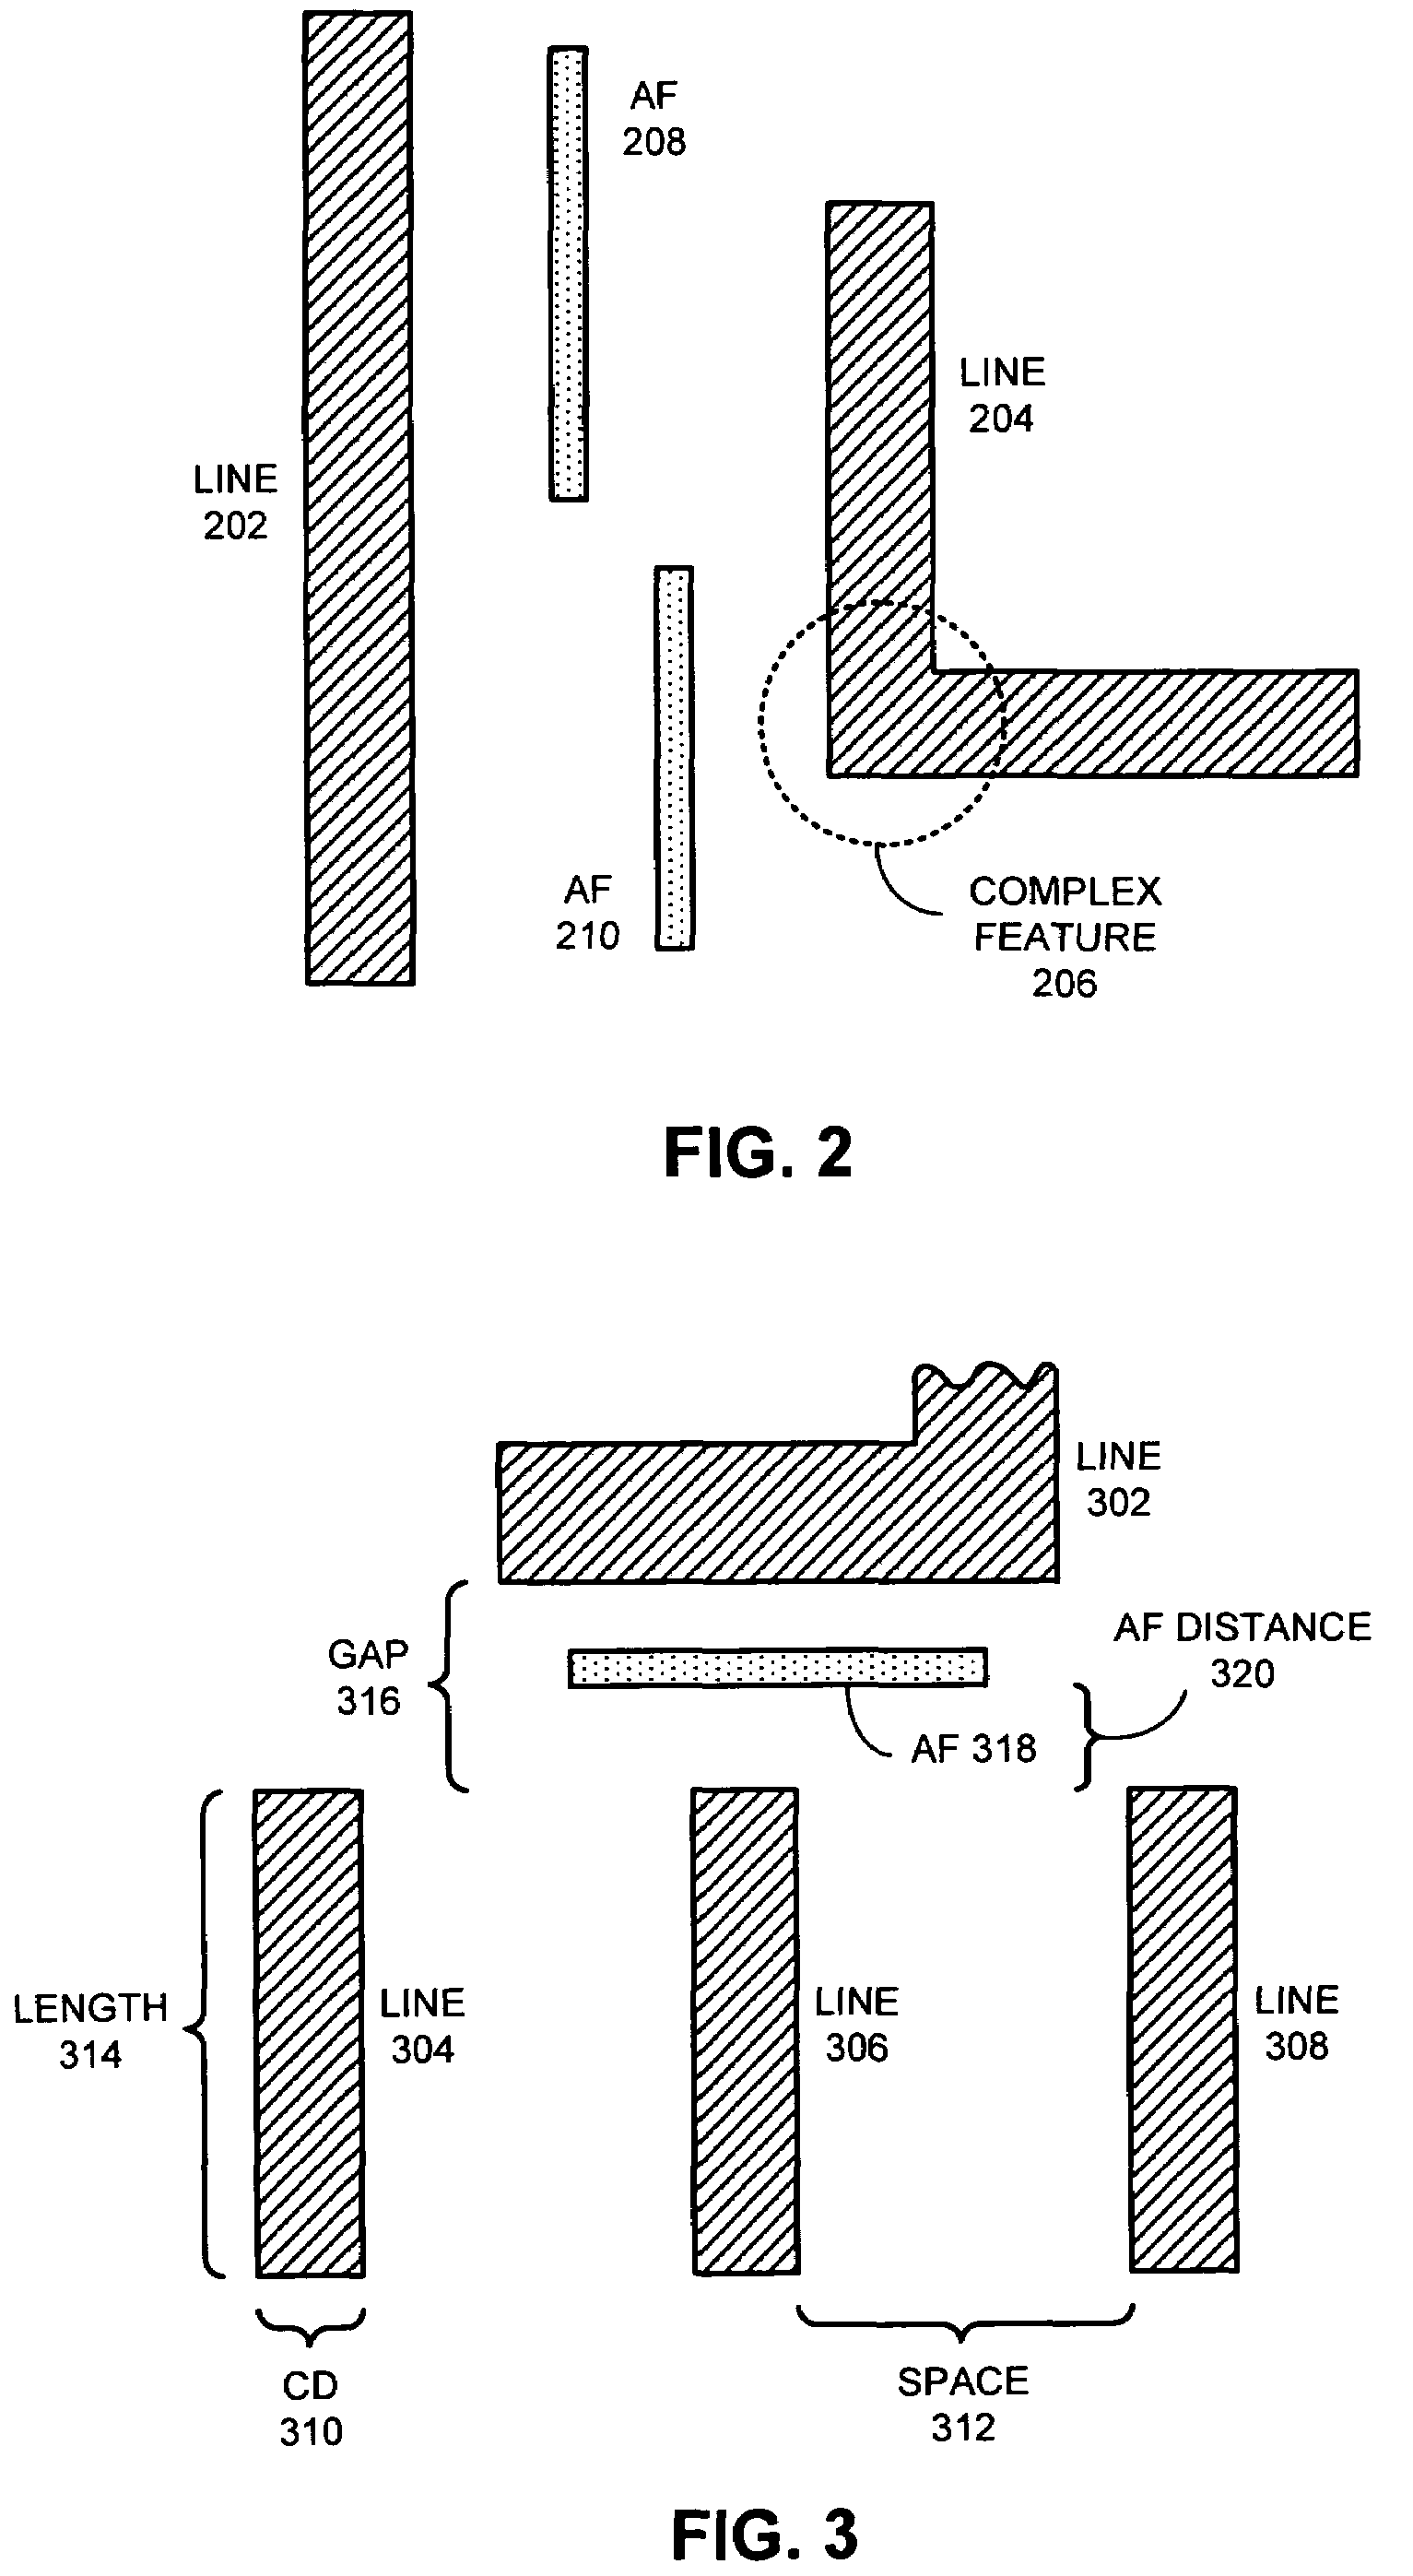 Method and apparatus for placing assist features by identifying locations of constructive and destructive interference